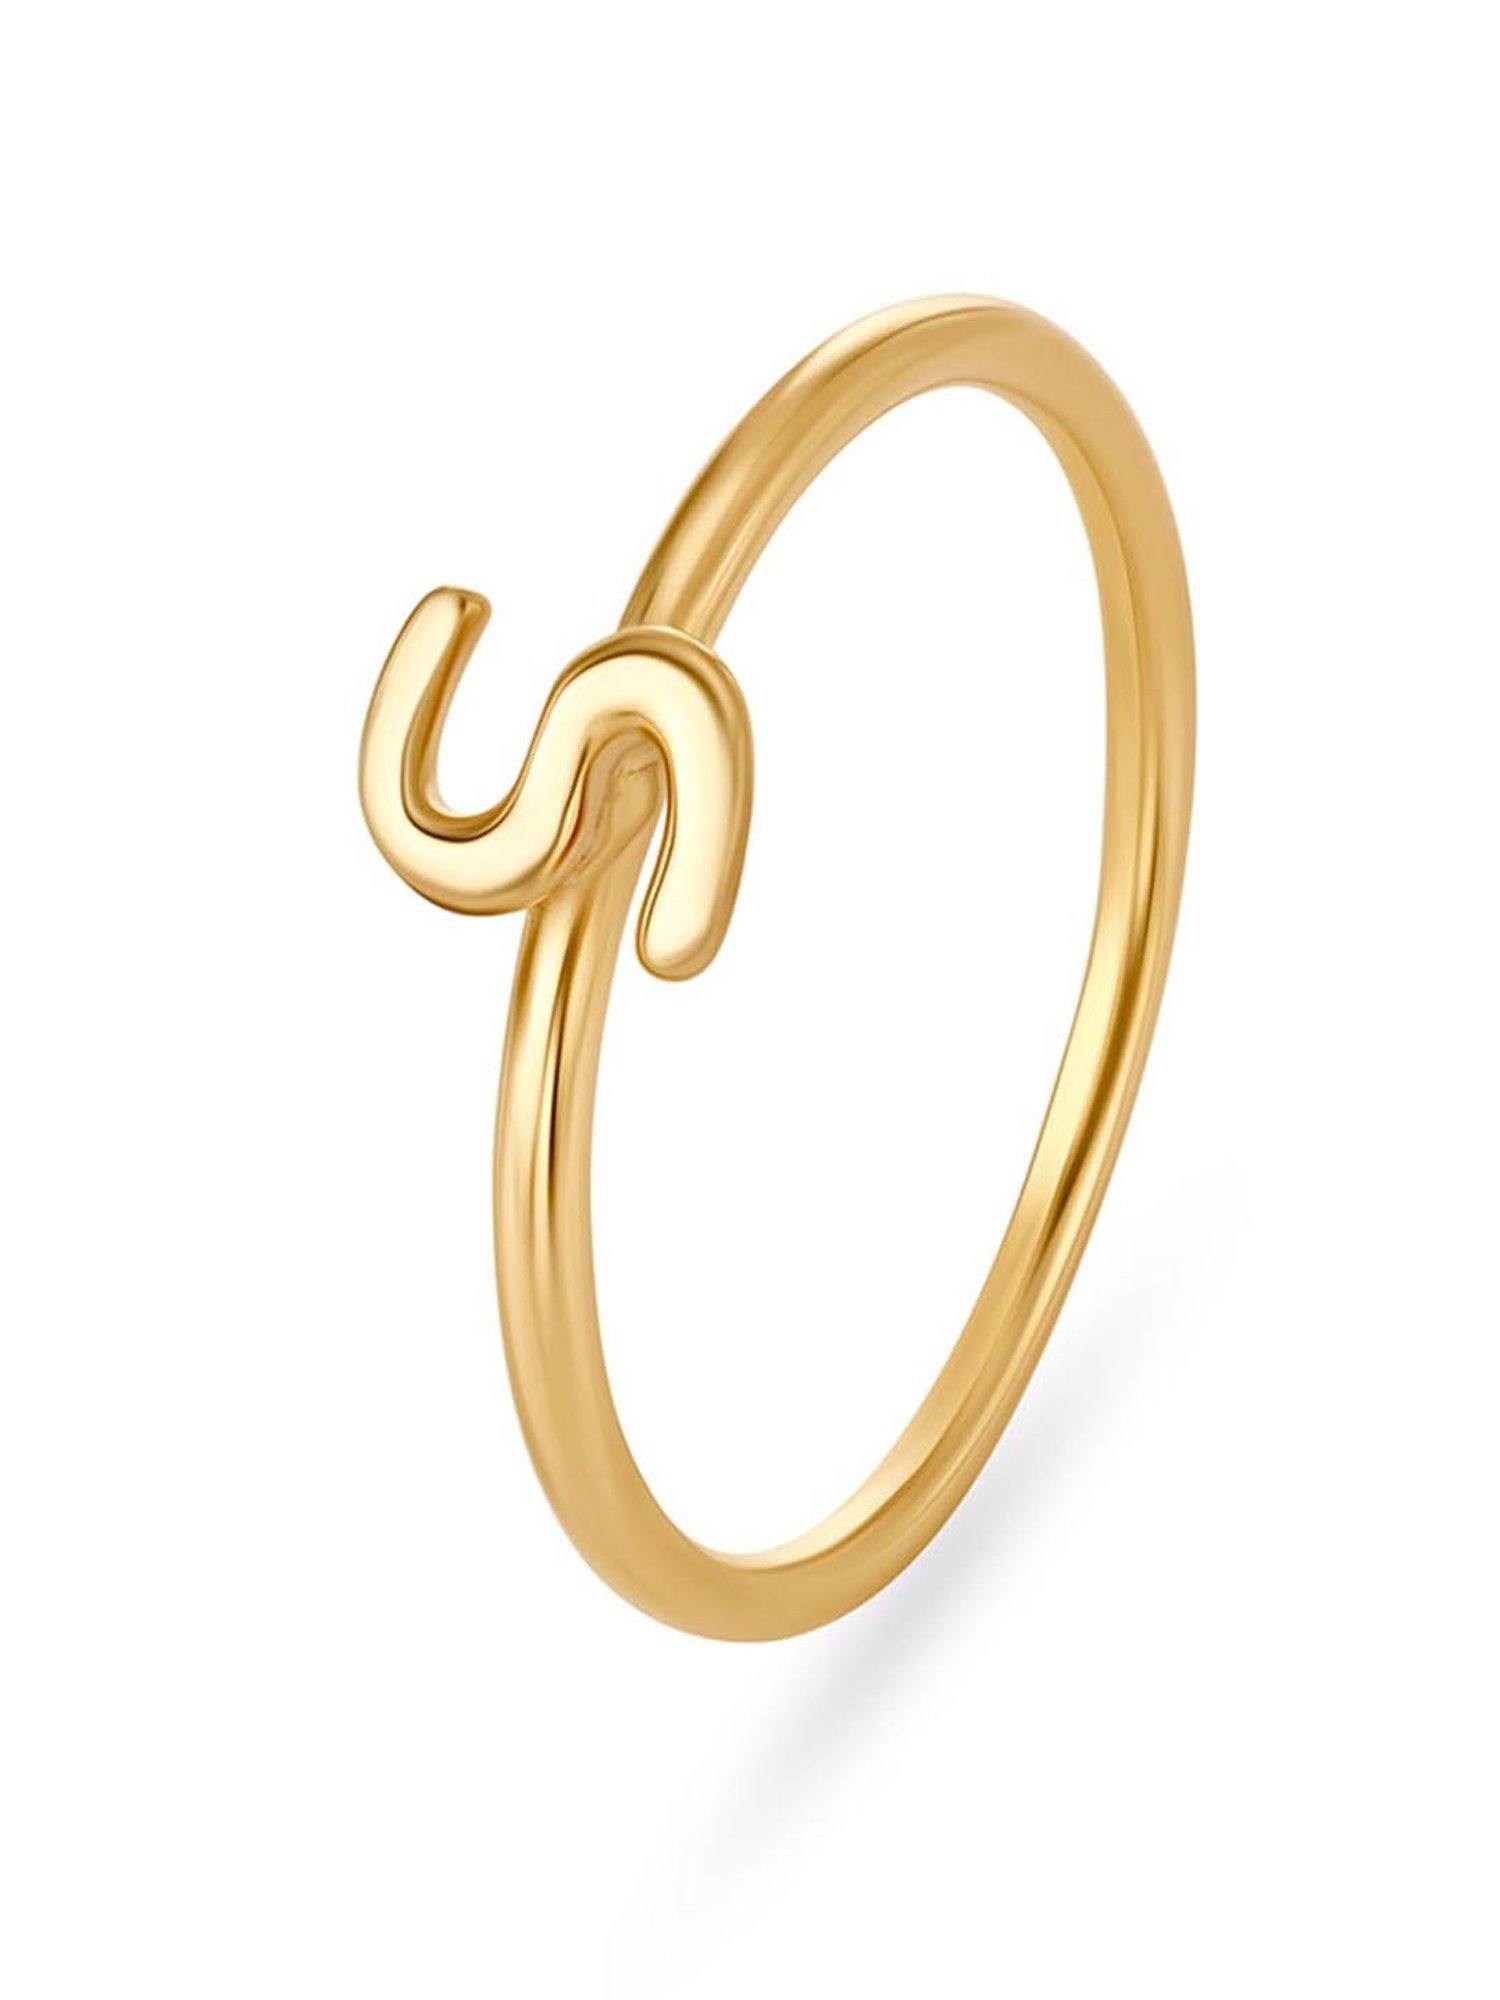 Yellow gold ring Harry Winston Gold size 3 ¼ US in Yellow gold - 39875013